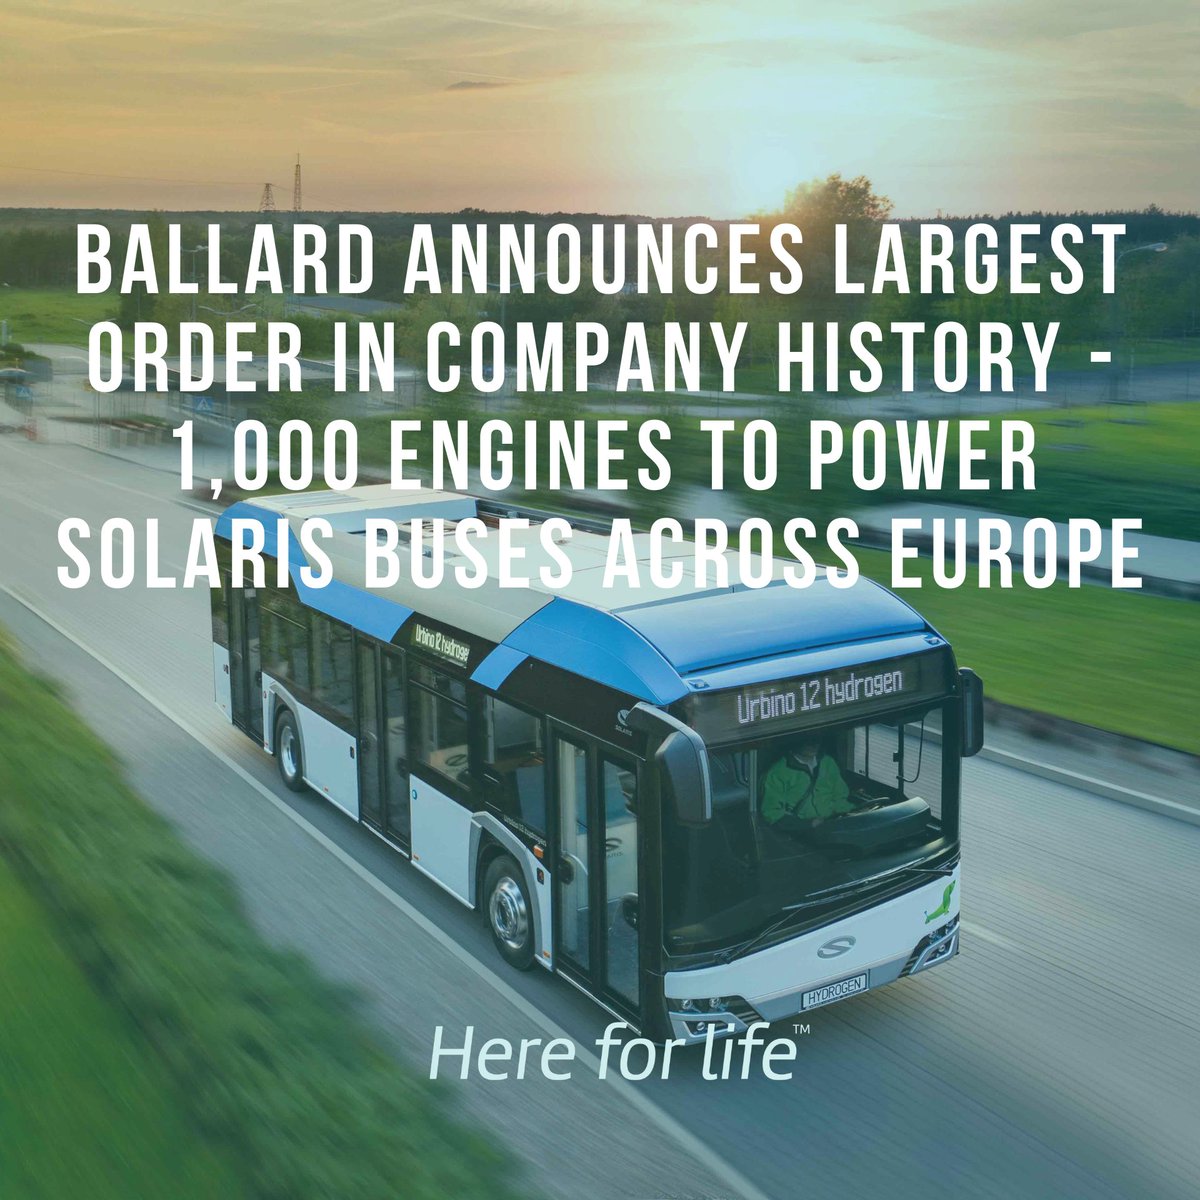 This landmark agreement embarks on the next phase of Ballard and Solaris’ partnership to accelerate fuel cell bus adoption in Europe bit.ly/3J0NWdP